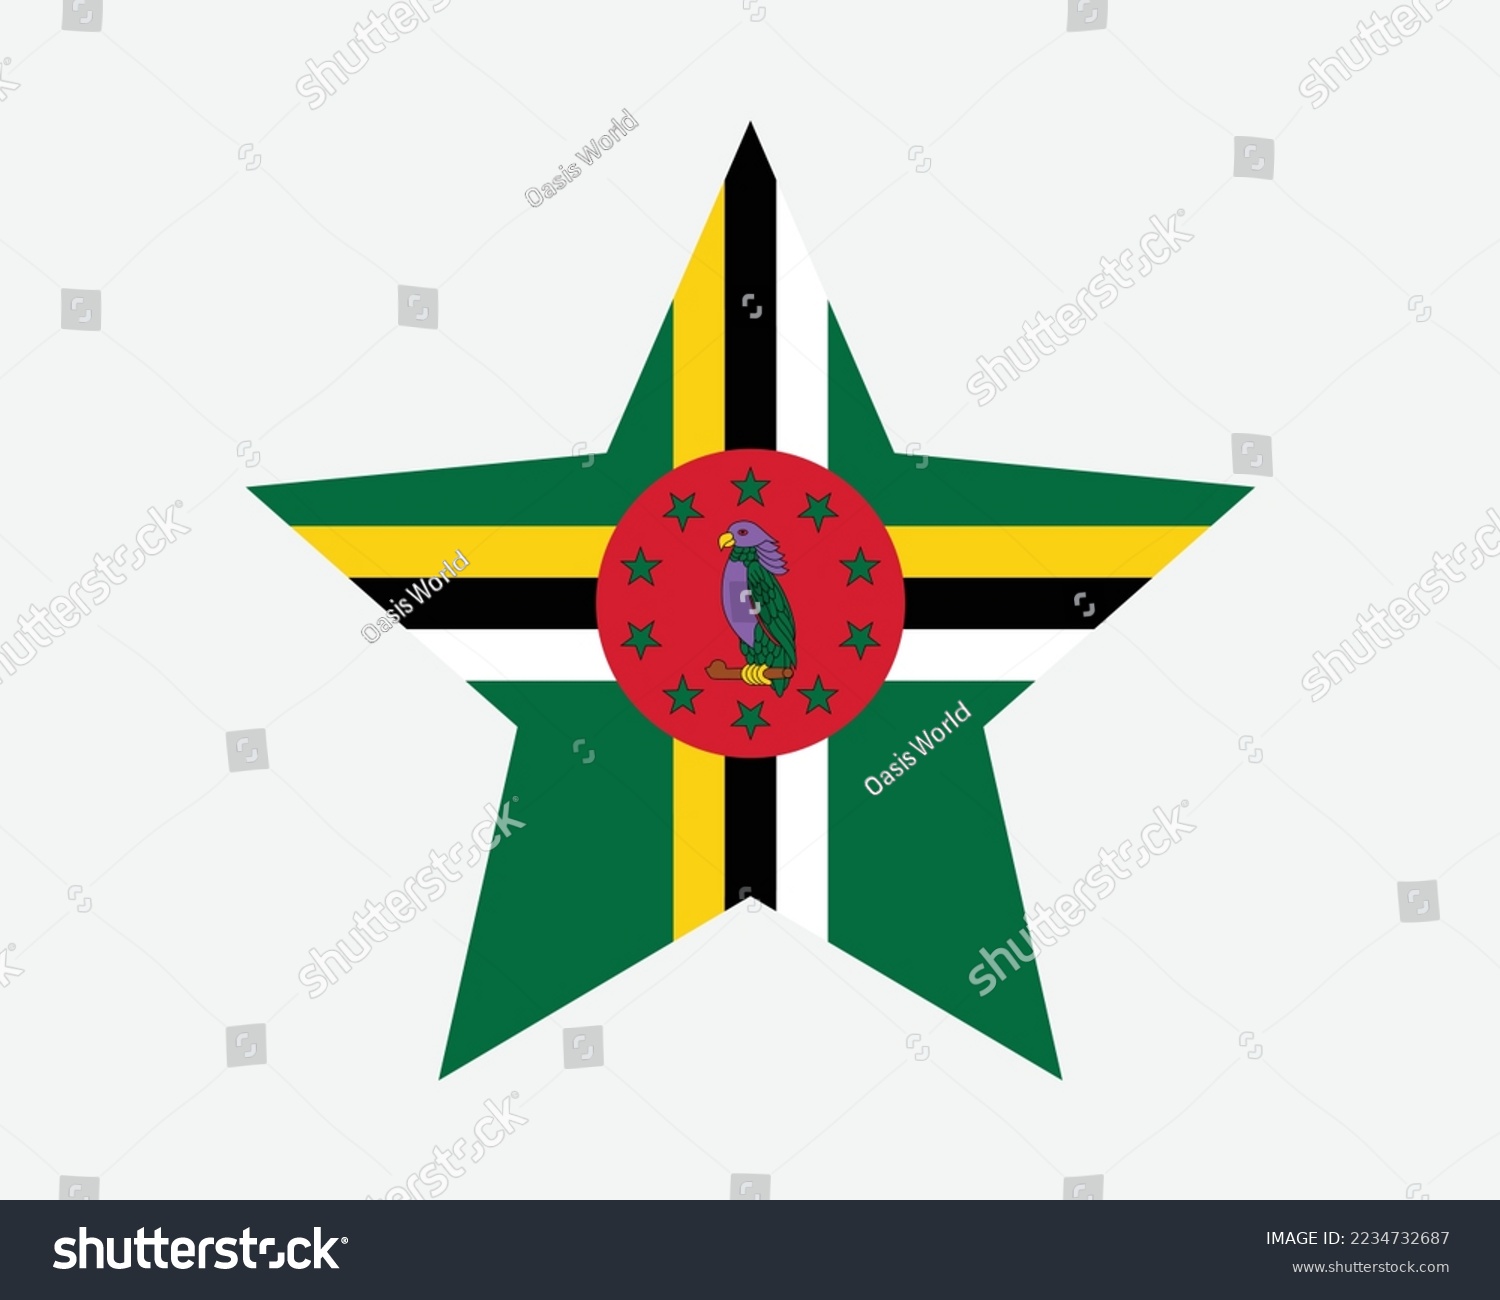 SVG of Dominica Star Flag. Dominican Star Shape Flag. Commonwealth of Dominica Country National Banner Icon Symbol Vector Flat Artwork Graphic Illustration svg